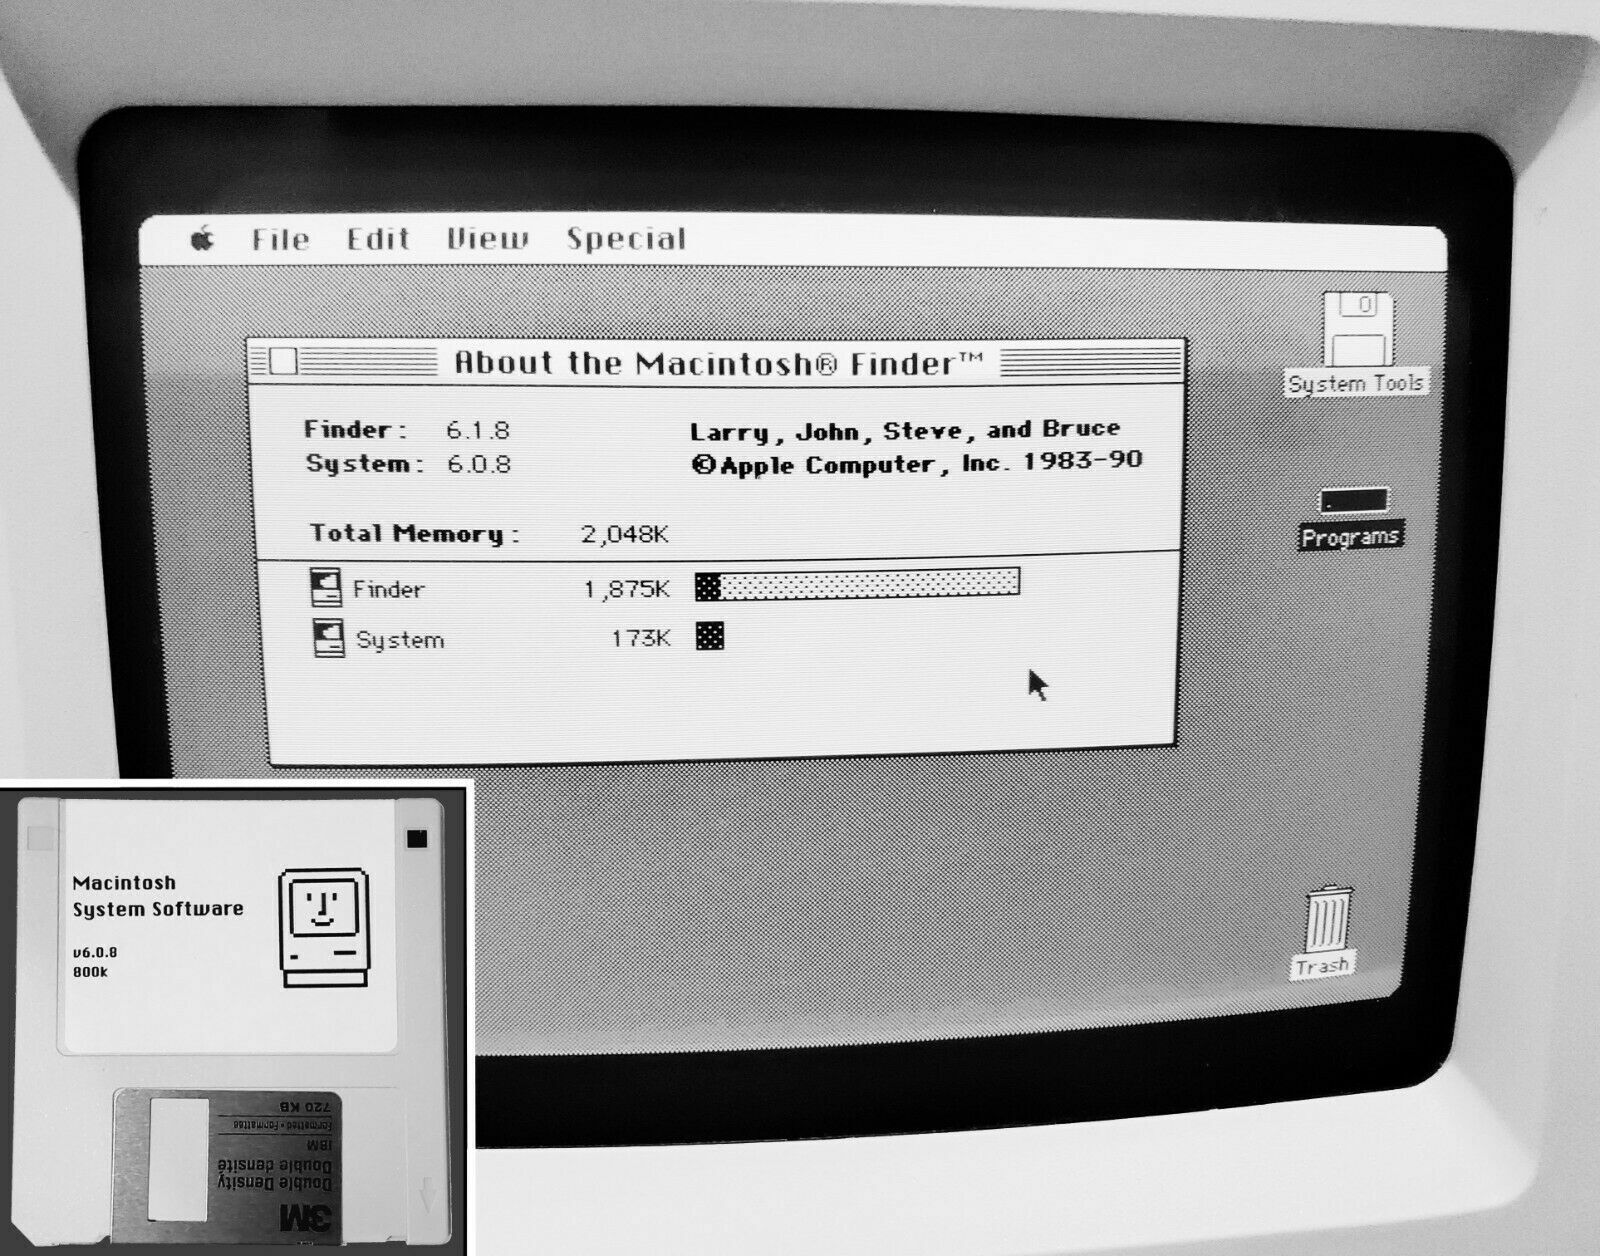 Classic Apple Macintosh Boot Disk System [1.1 - 6.0.8] 400/800k for Vintage Macs